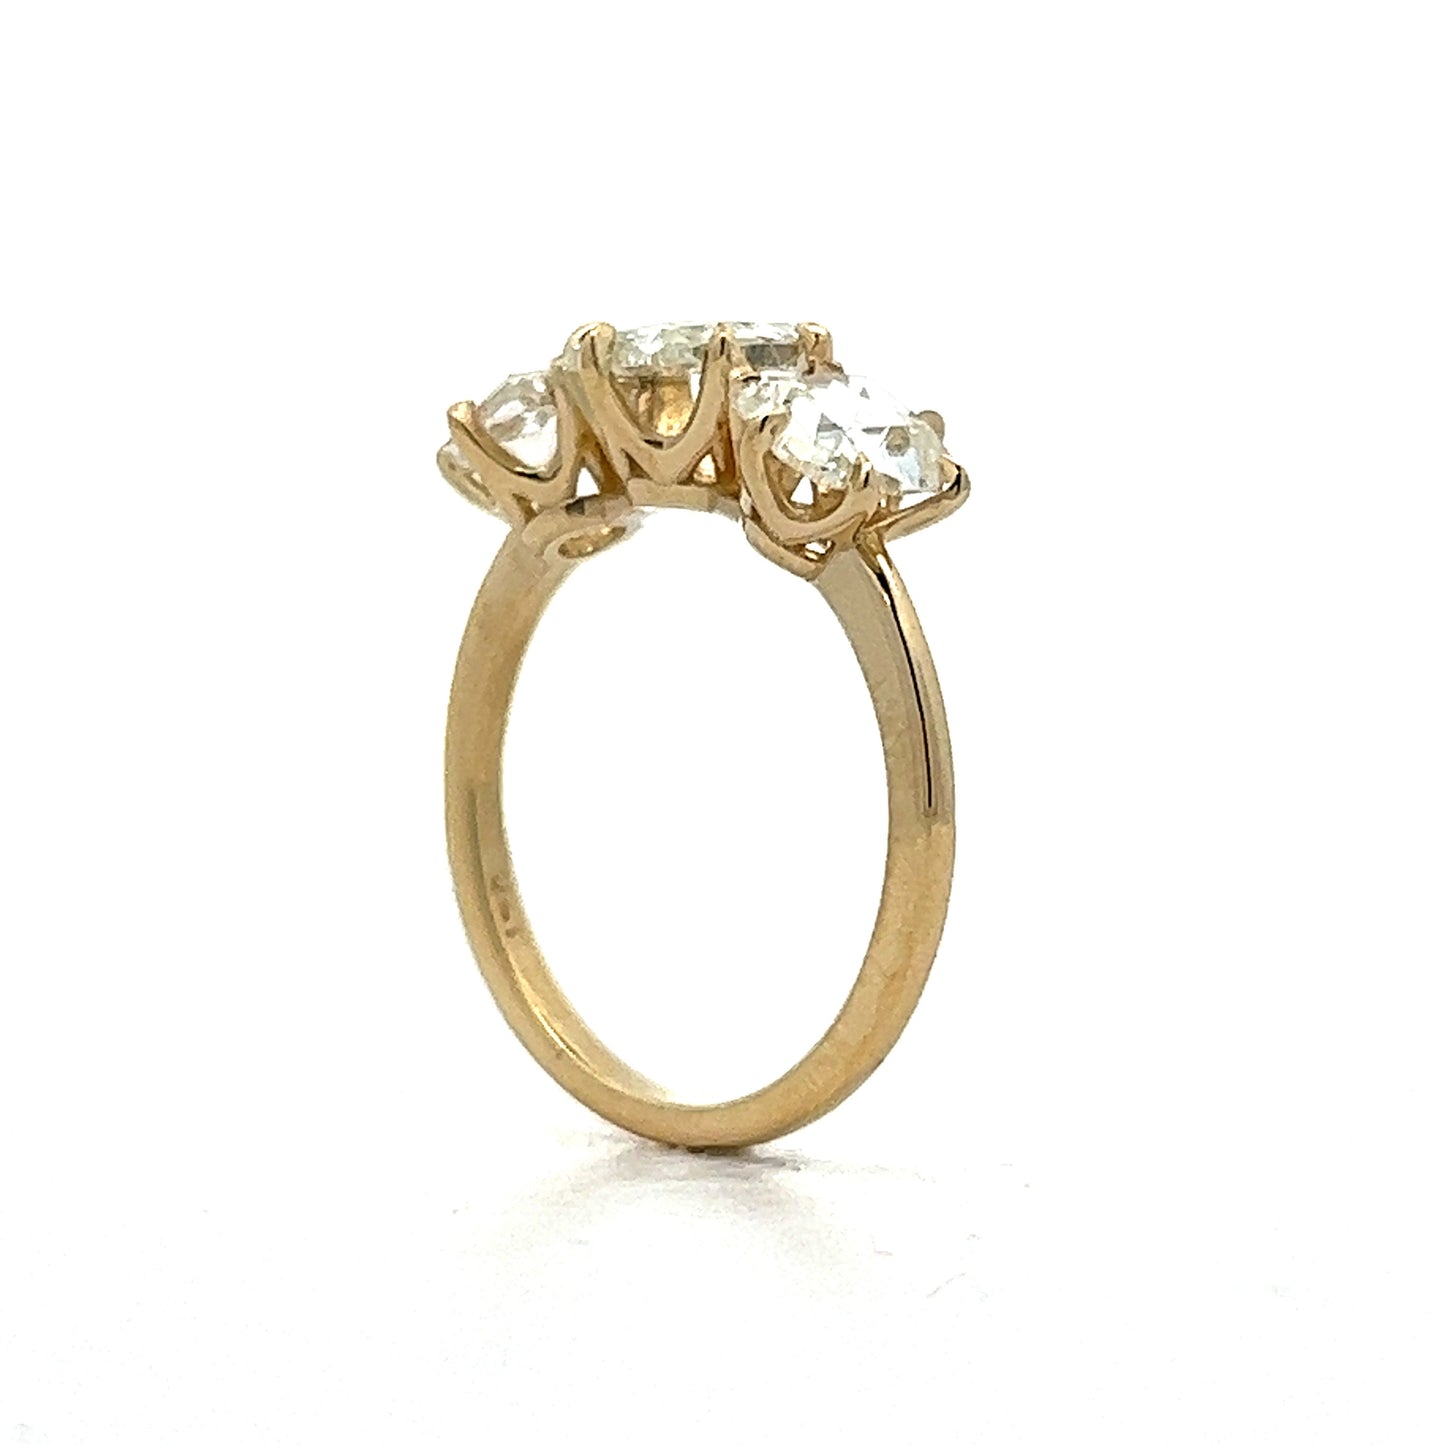 1.76 Rose Cut Diamond Engagement Ring in Yellow Gold